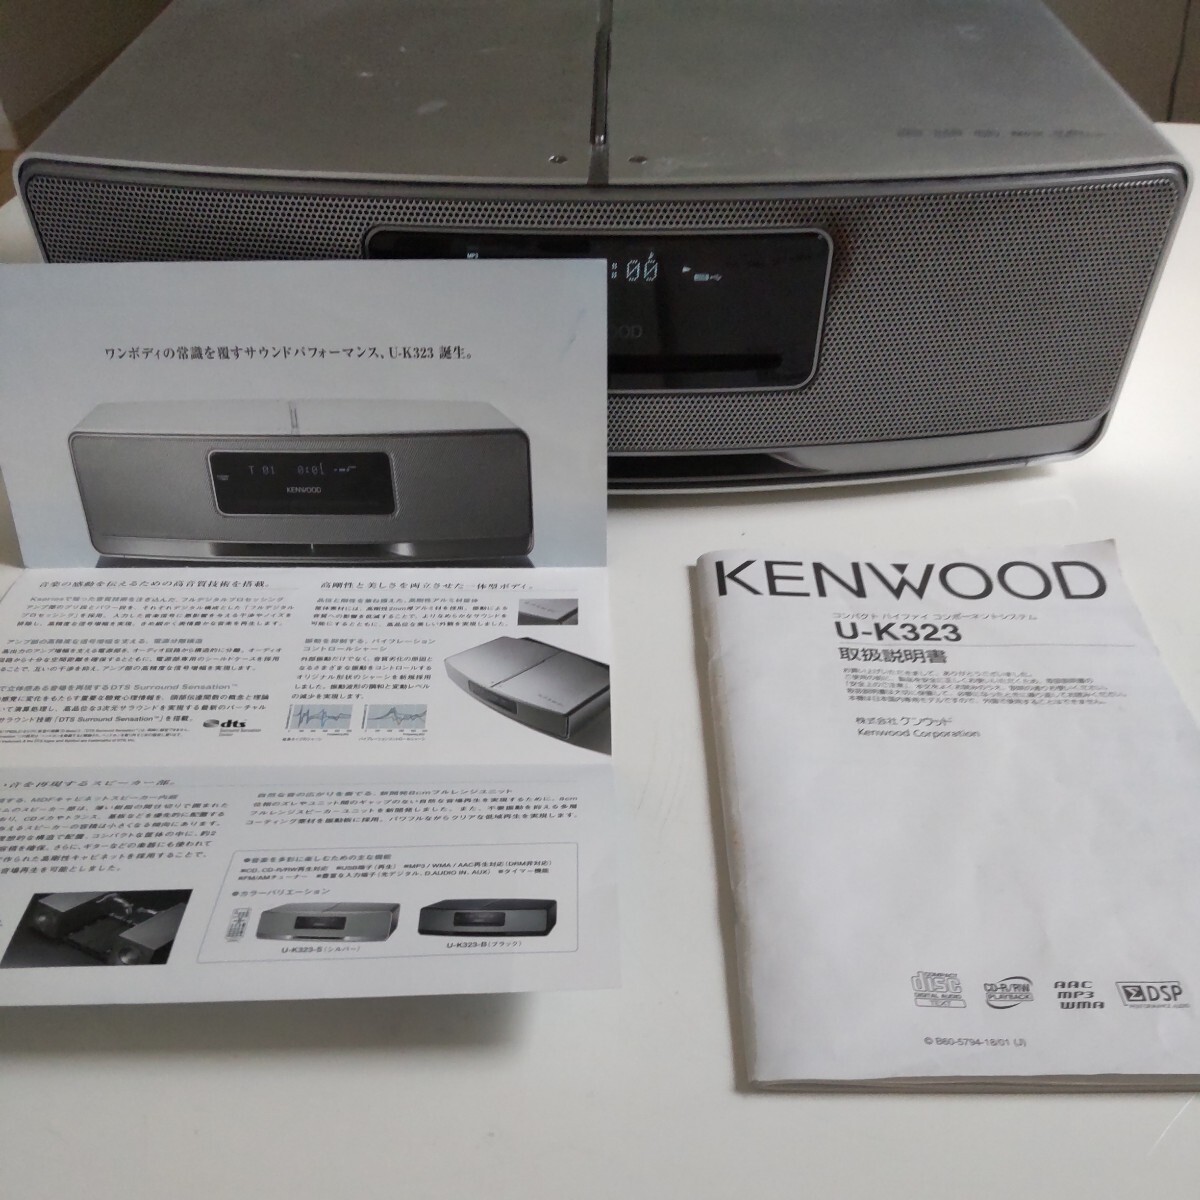  Kenwood made U-K323/ compact * high fai* player [ secondhand goods /CD reproduction .USB preservation music file reproduction has confirmed / user's manual * remote control attaching .]